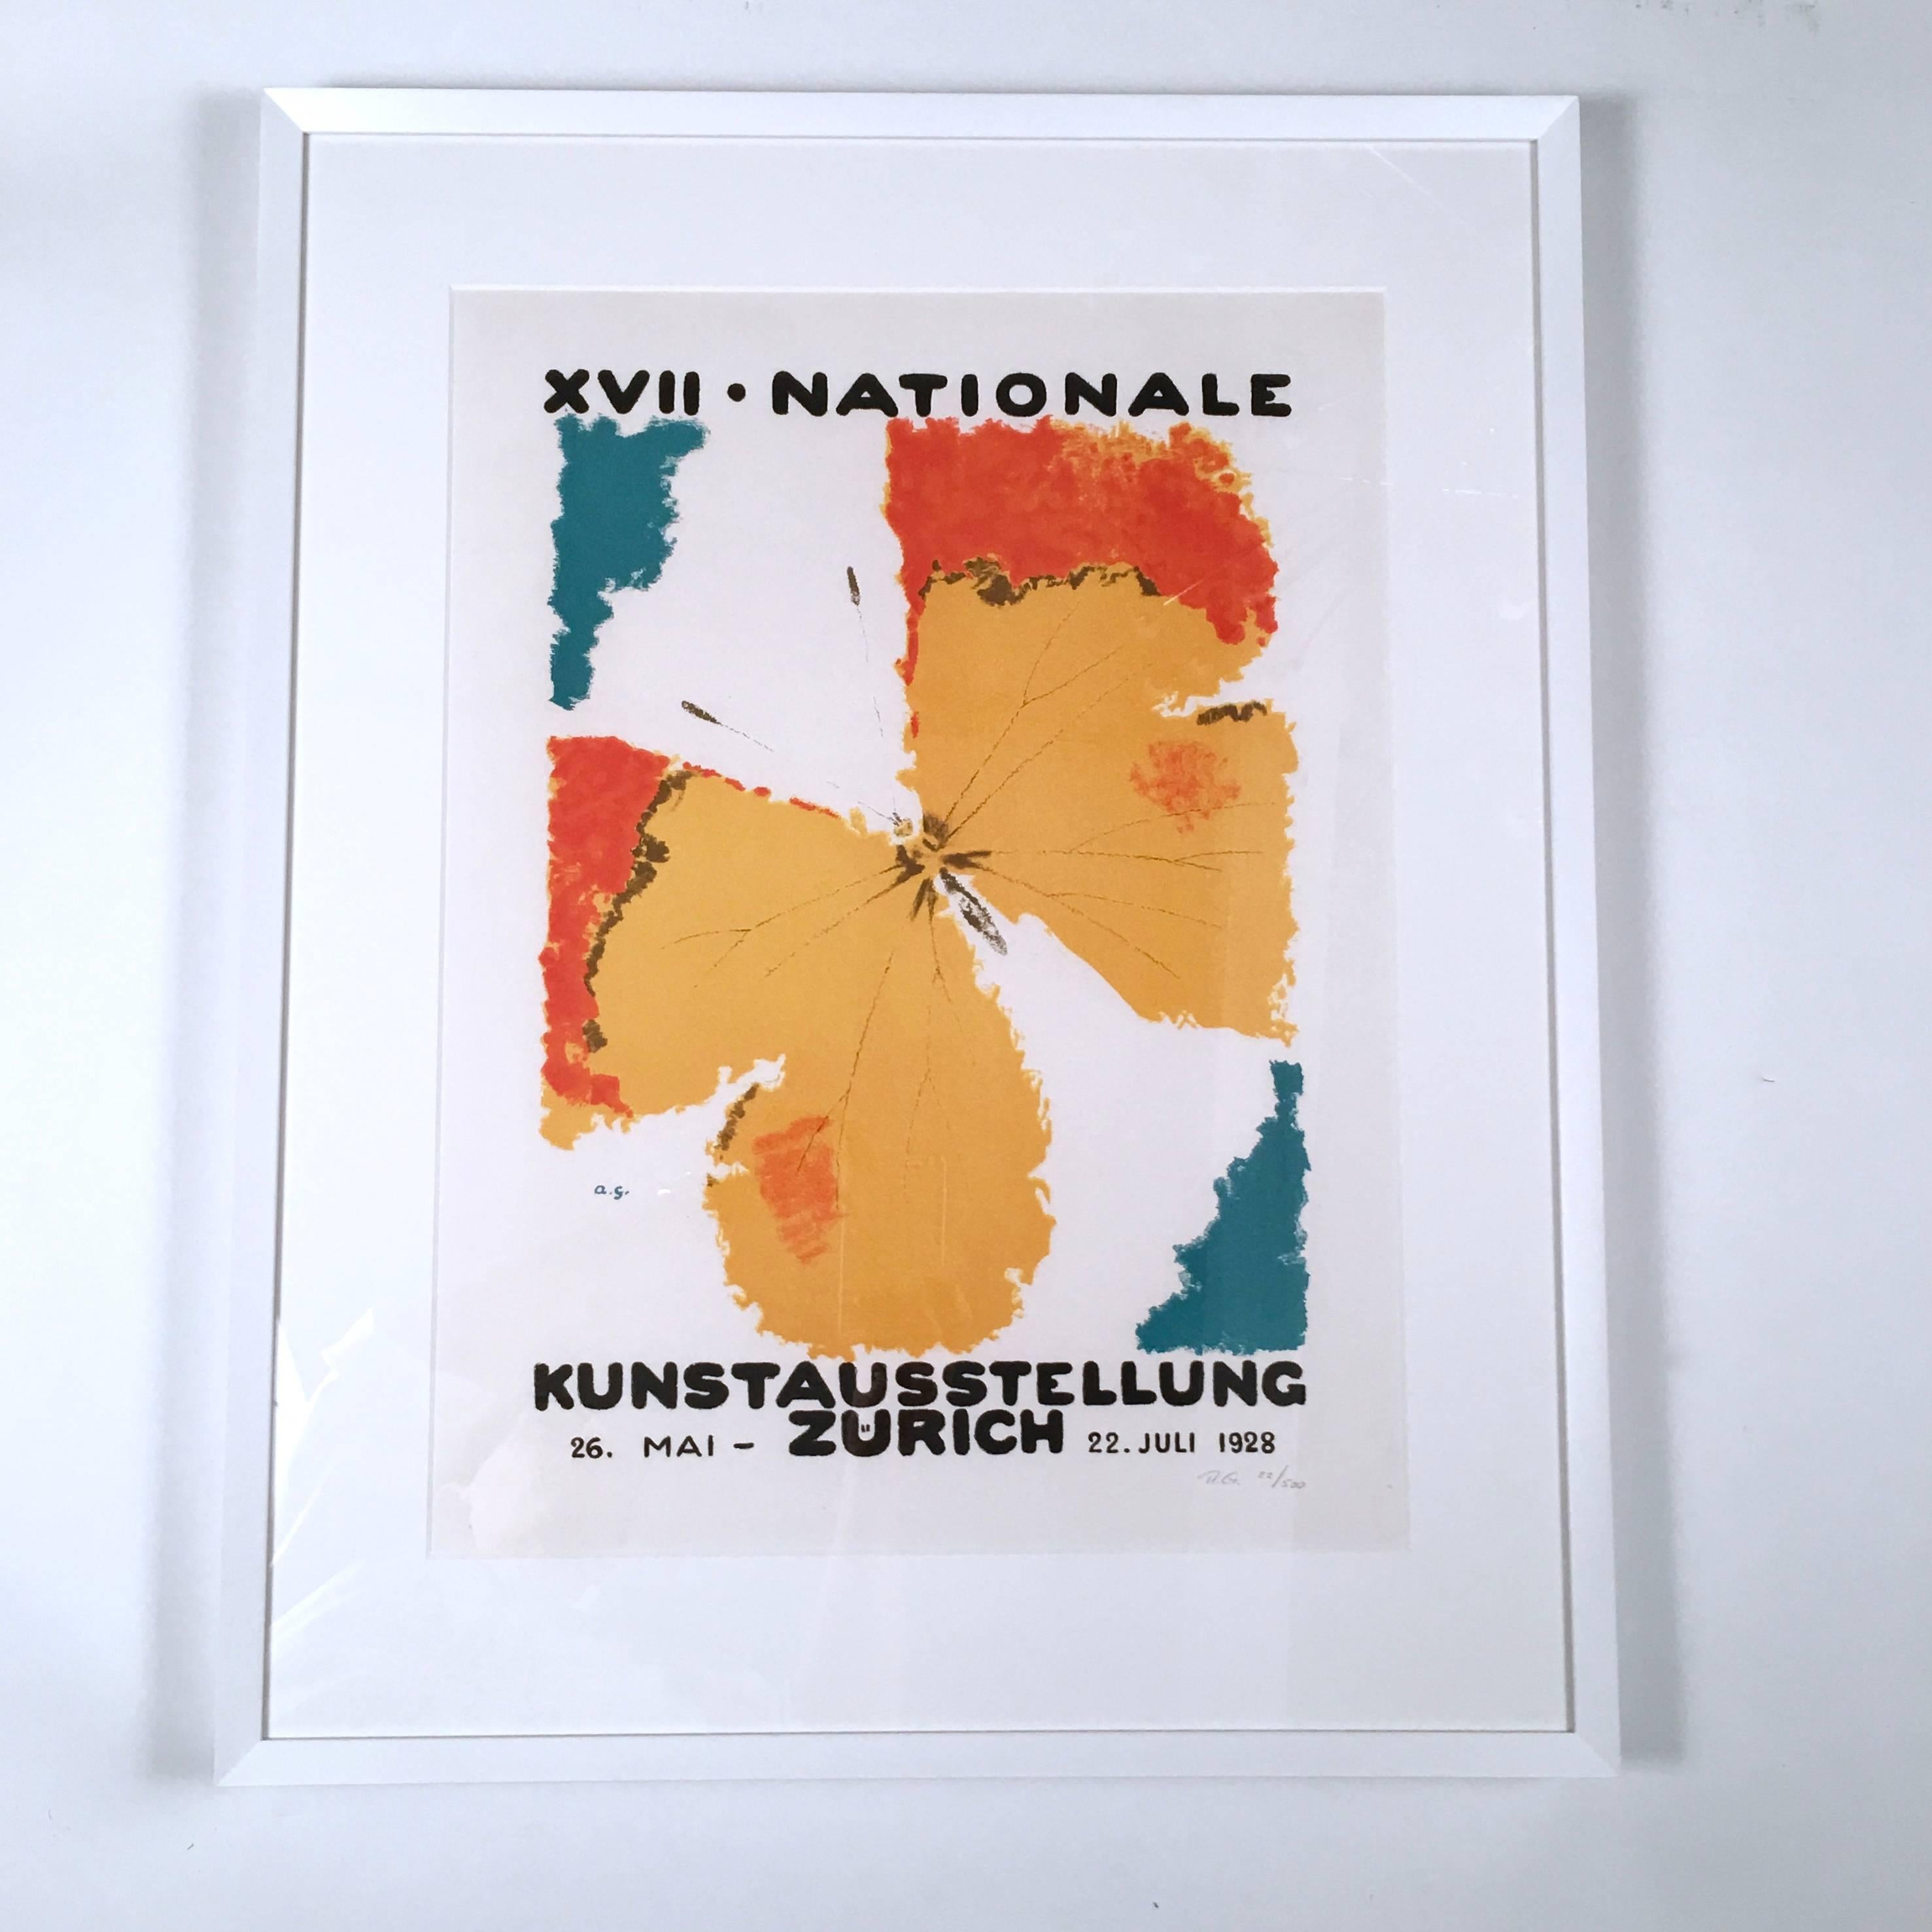 A beautifully printed lithograph poster of the 1928 Augusto Giacometti poster made for the 17th National Art Exhibition in Zurich, Switzerland, depicting an orange and yellow butterfly on a white field with blue corners. This poster is a hand